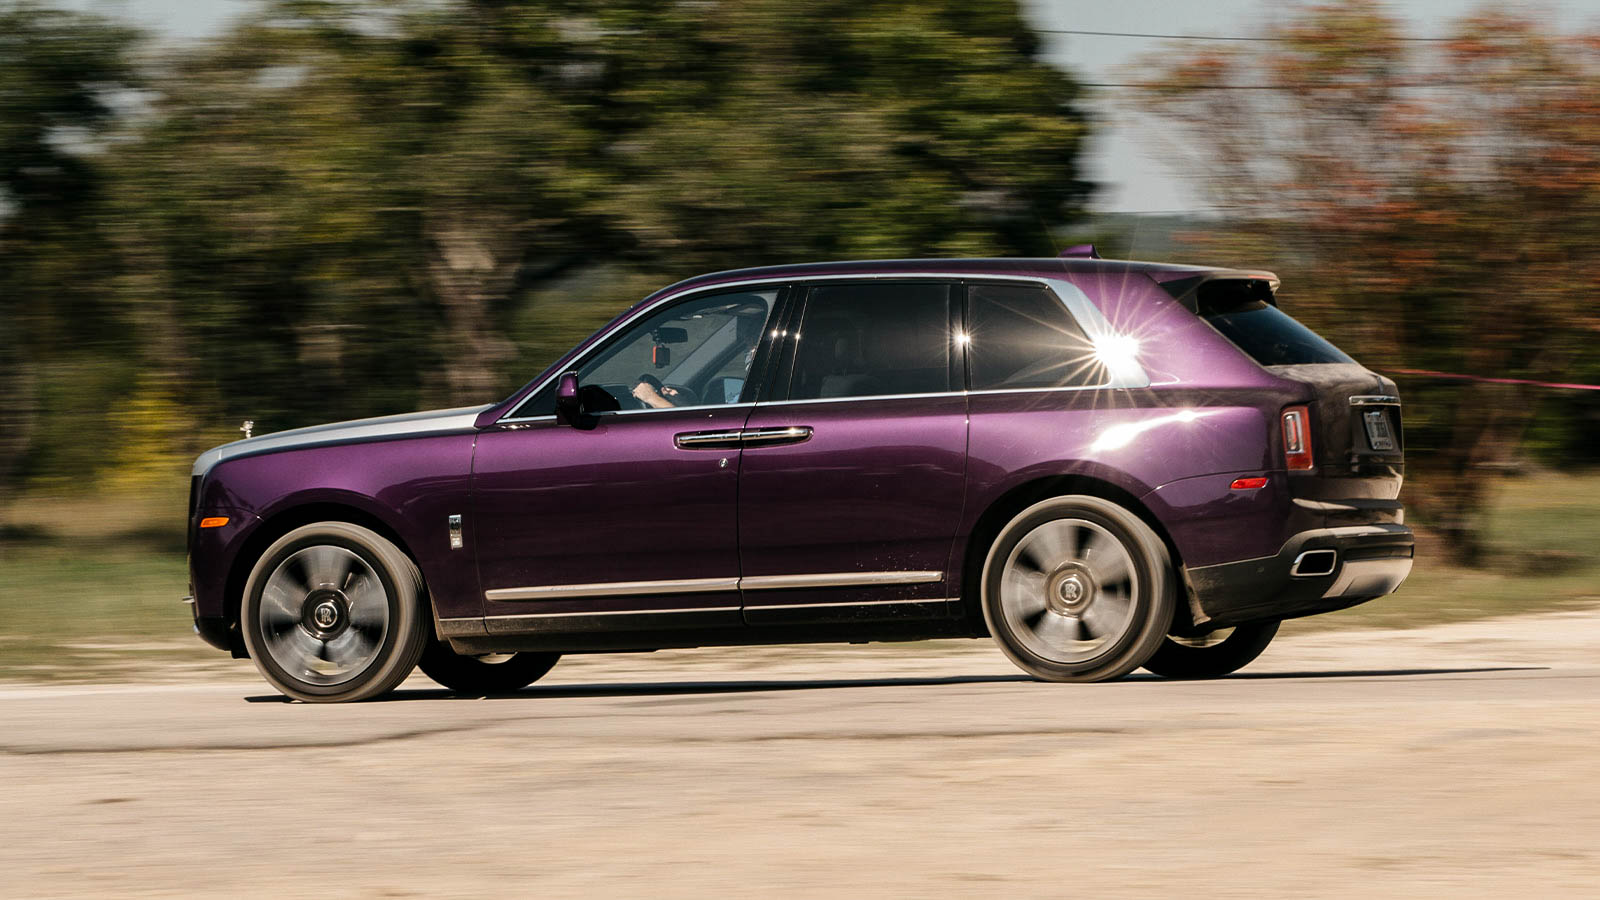 Rolls-Royce Cullinan Yachting Edition Is The Rolex Of SUVs